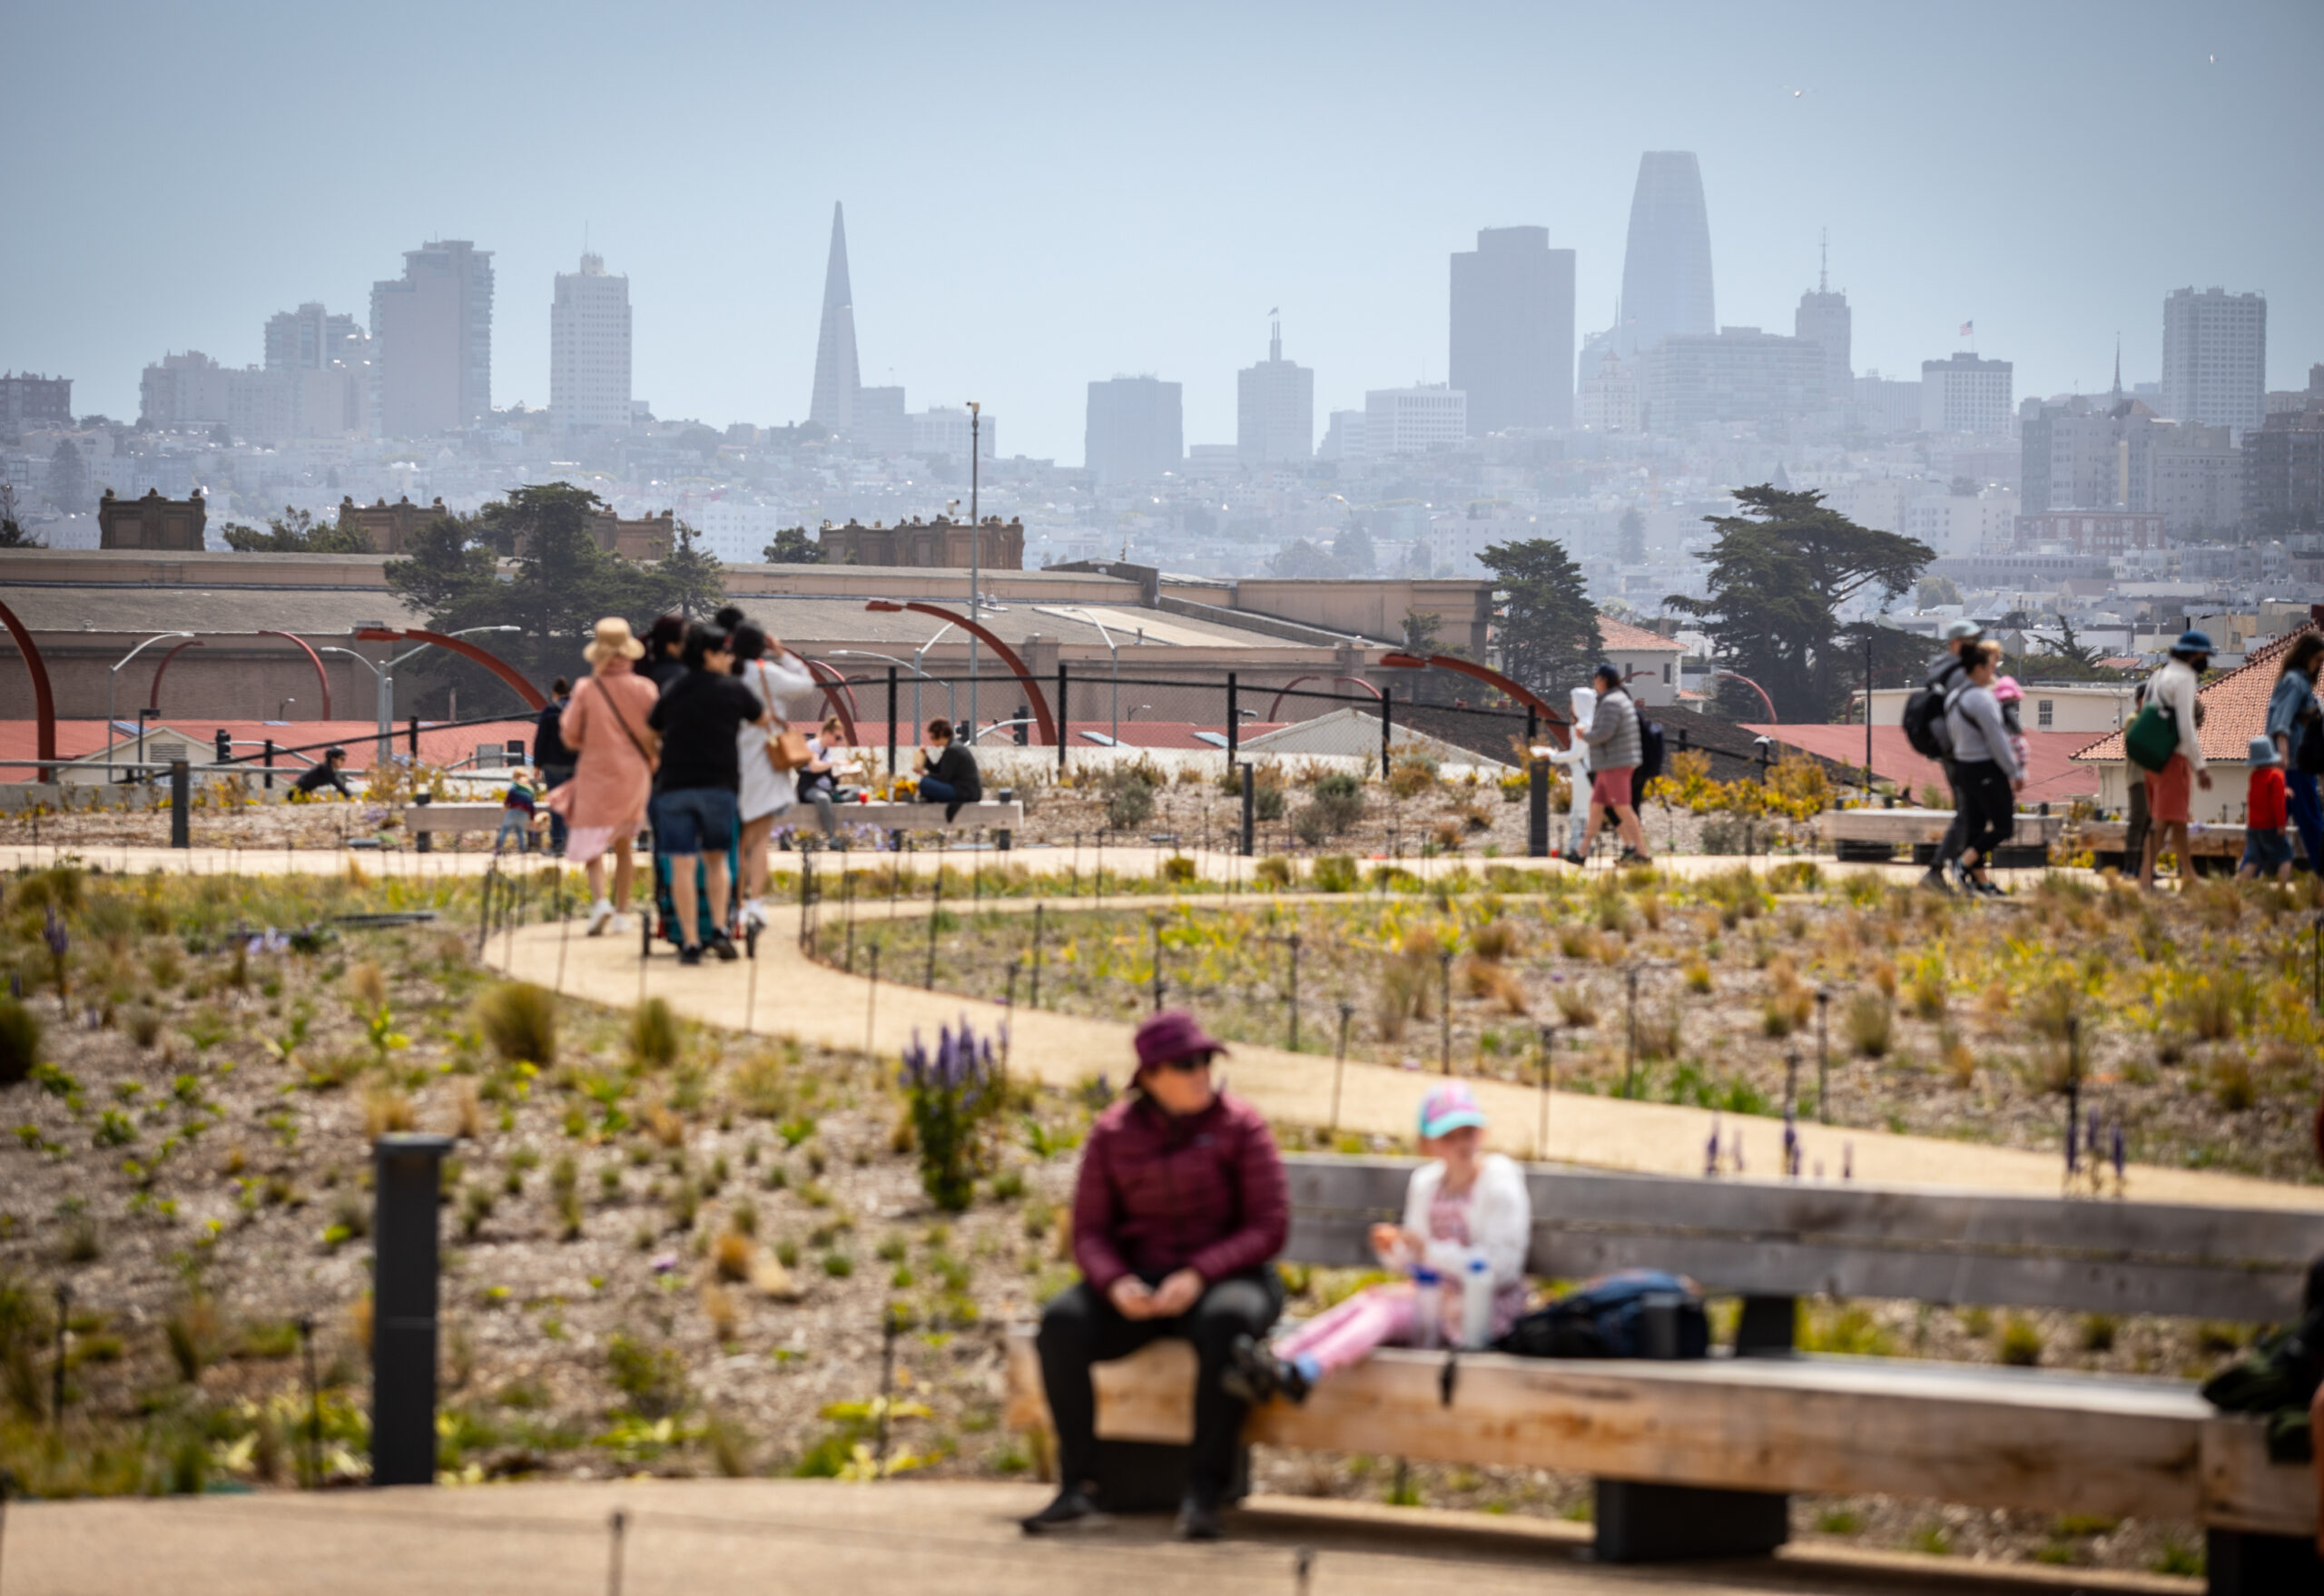 Plan a Perfect Date at San Francisco’s Presidio Tunnel Tops